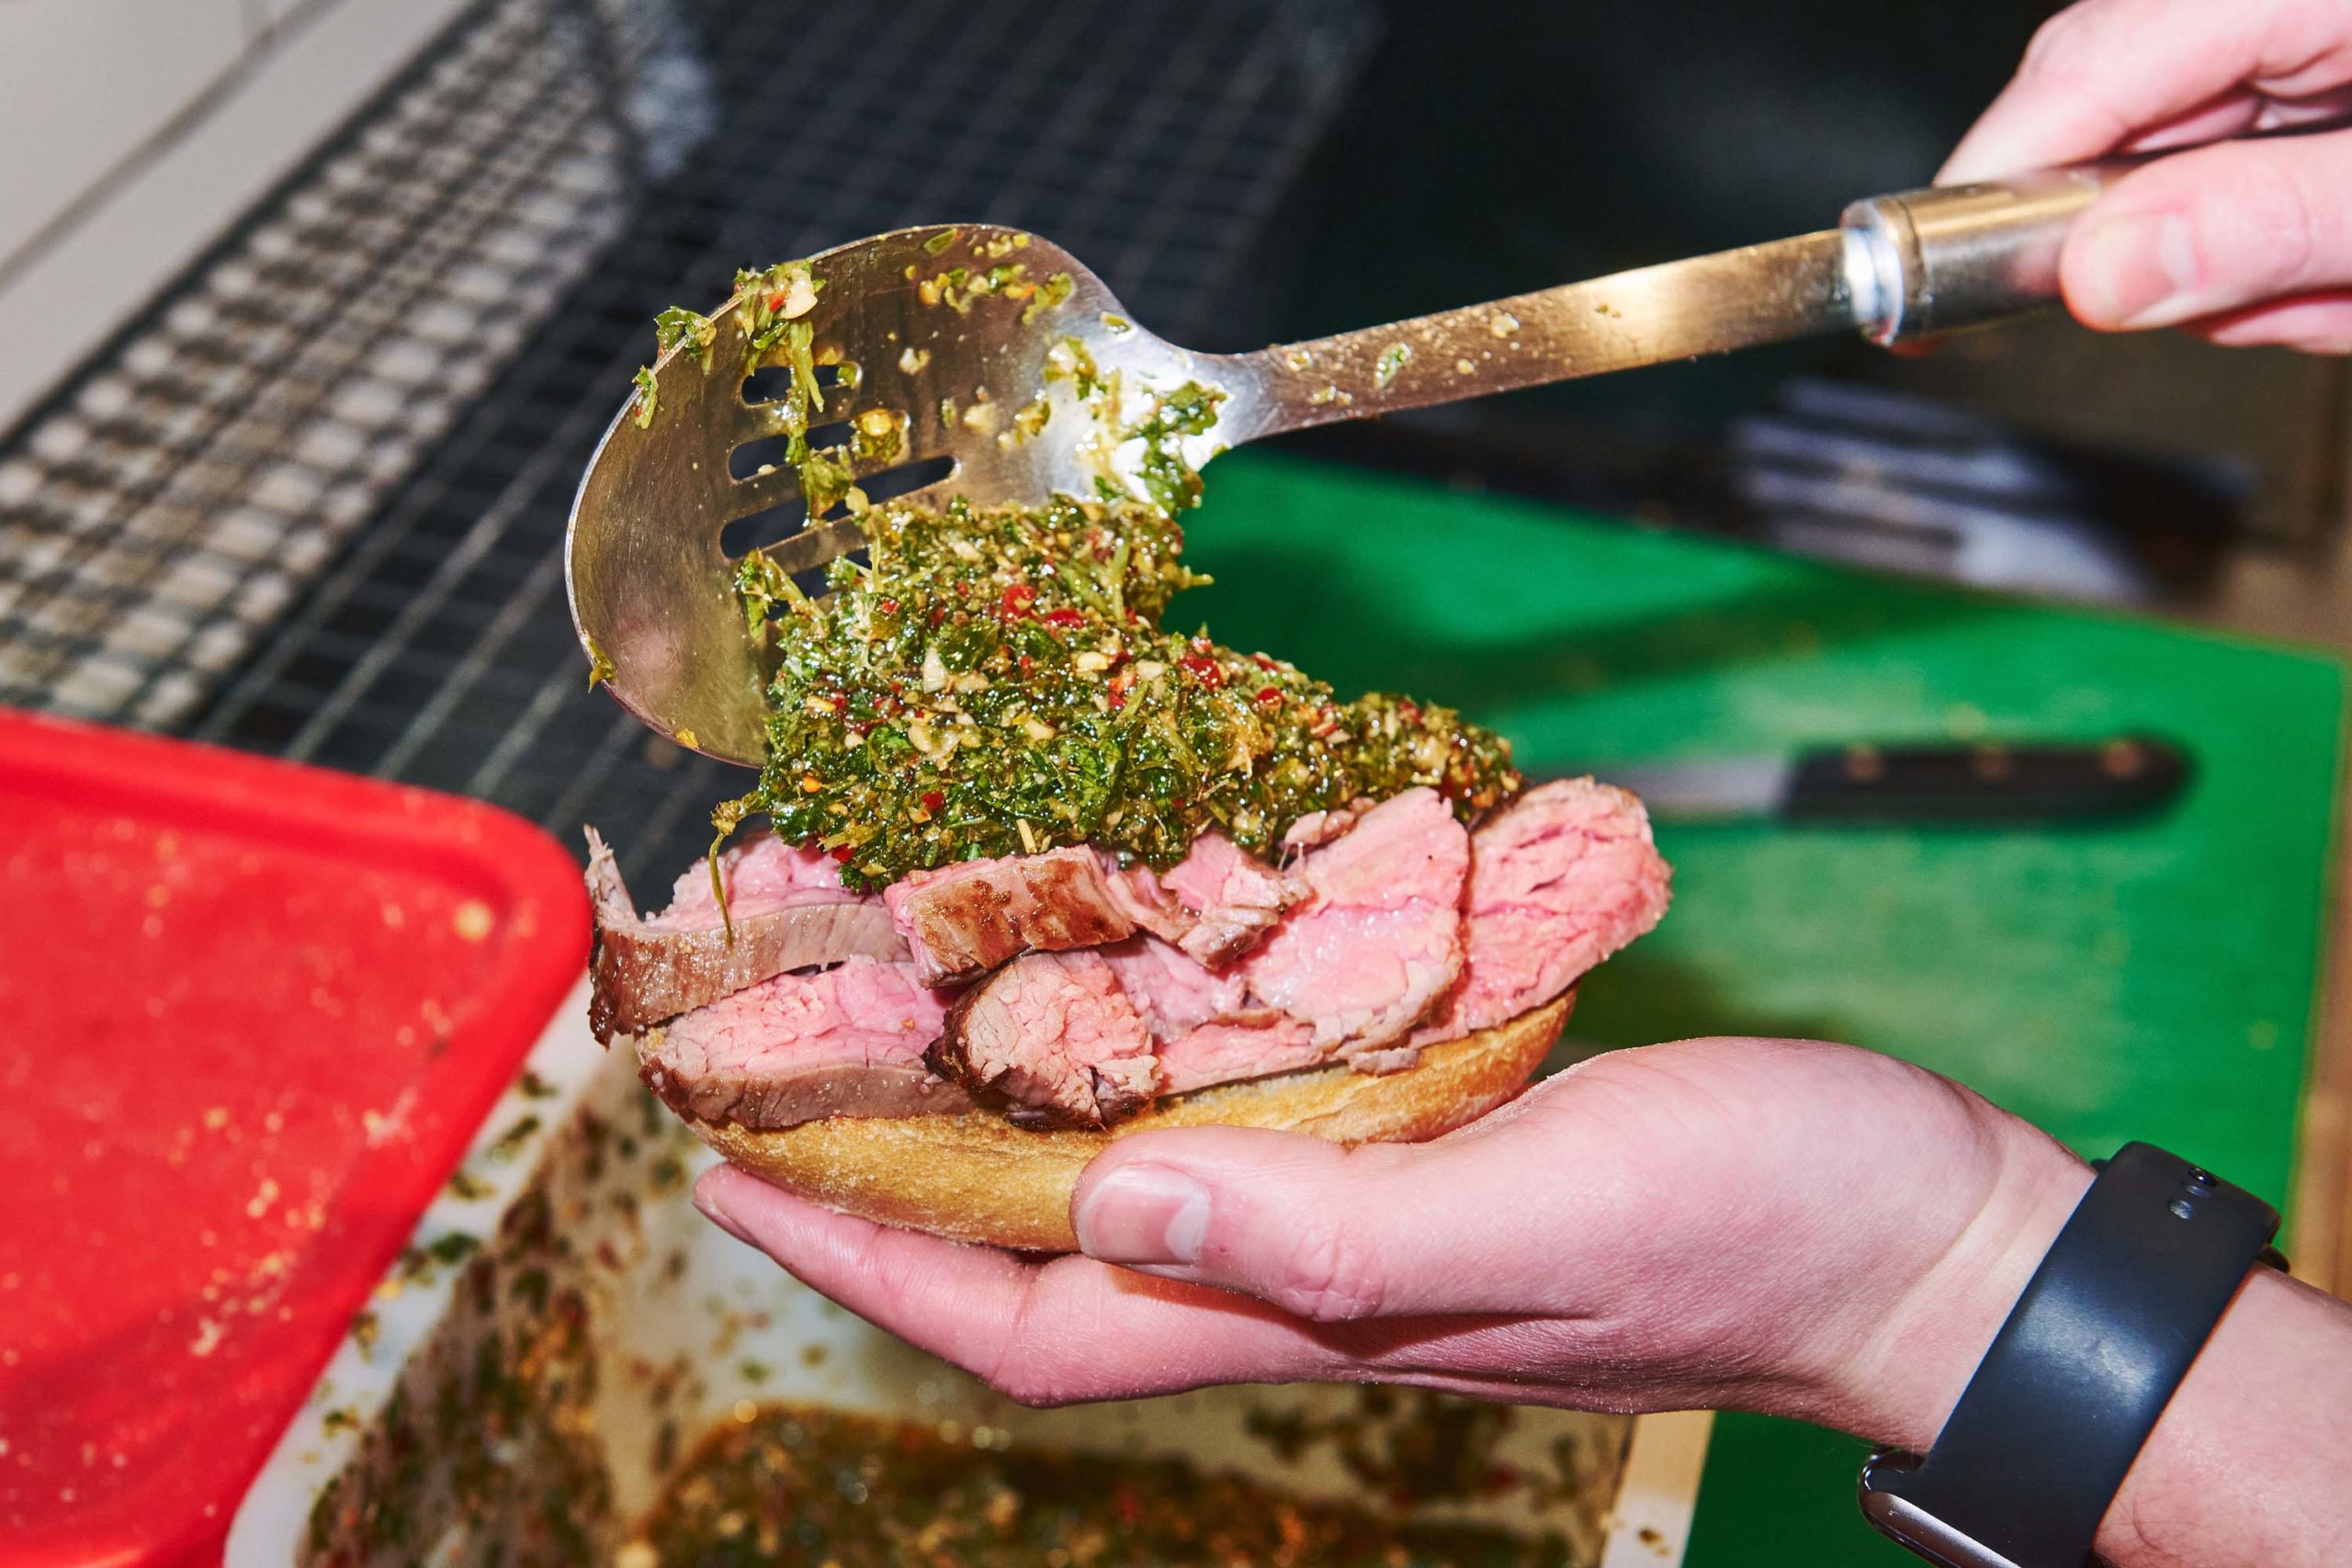 A person uses a ladle to scoop chimichurri onto a steak sandwich